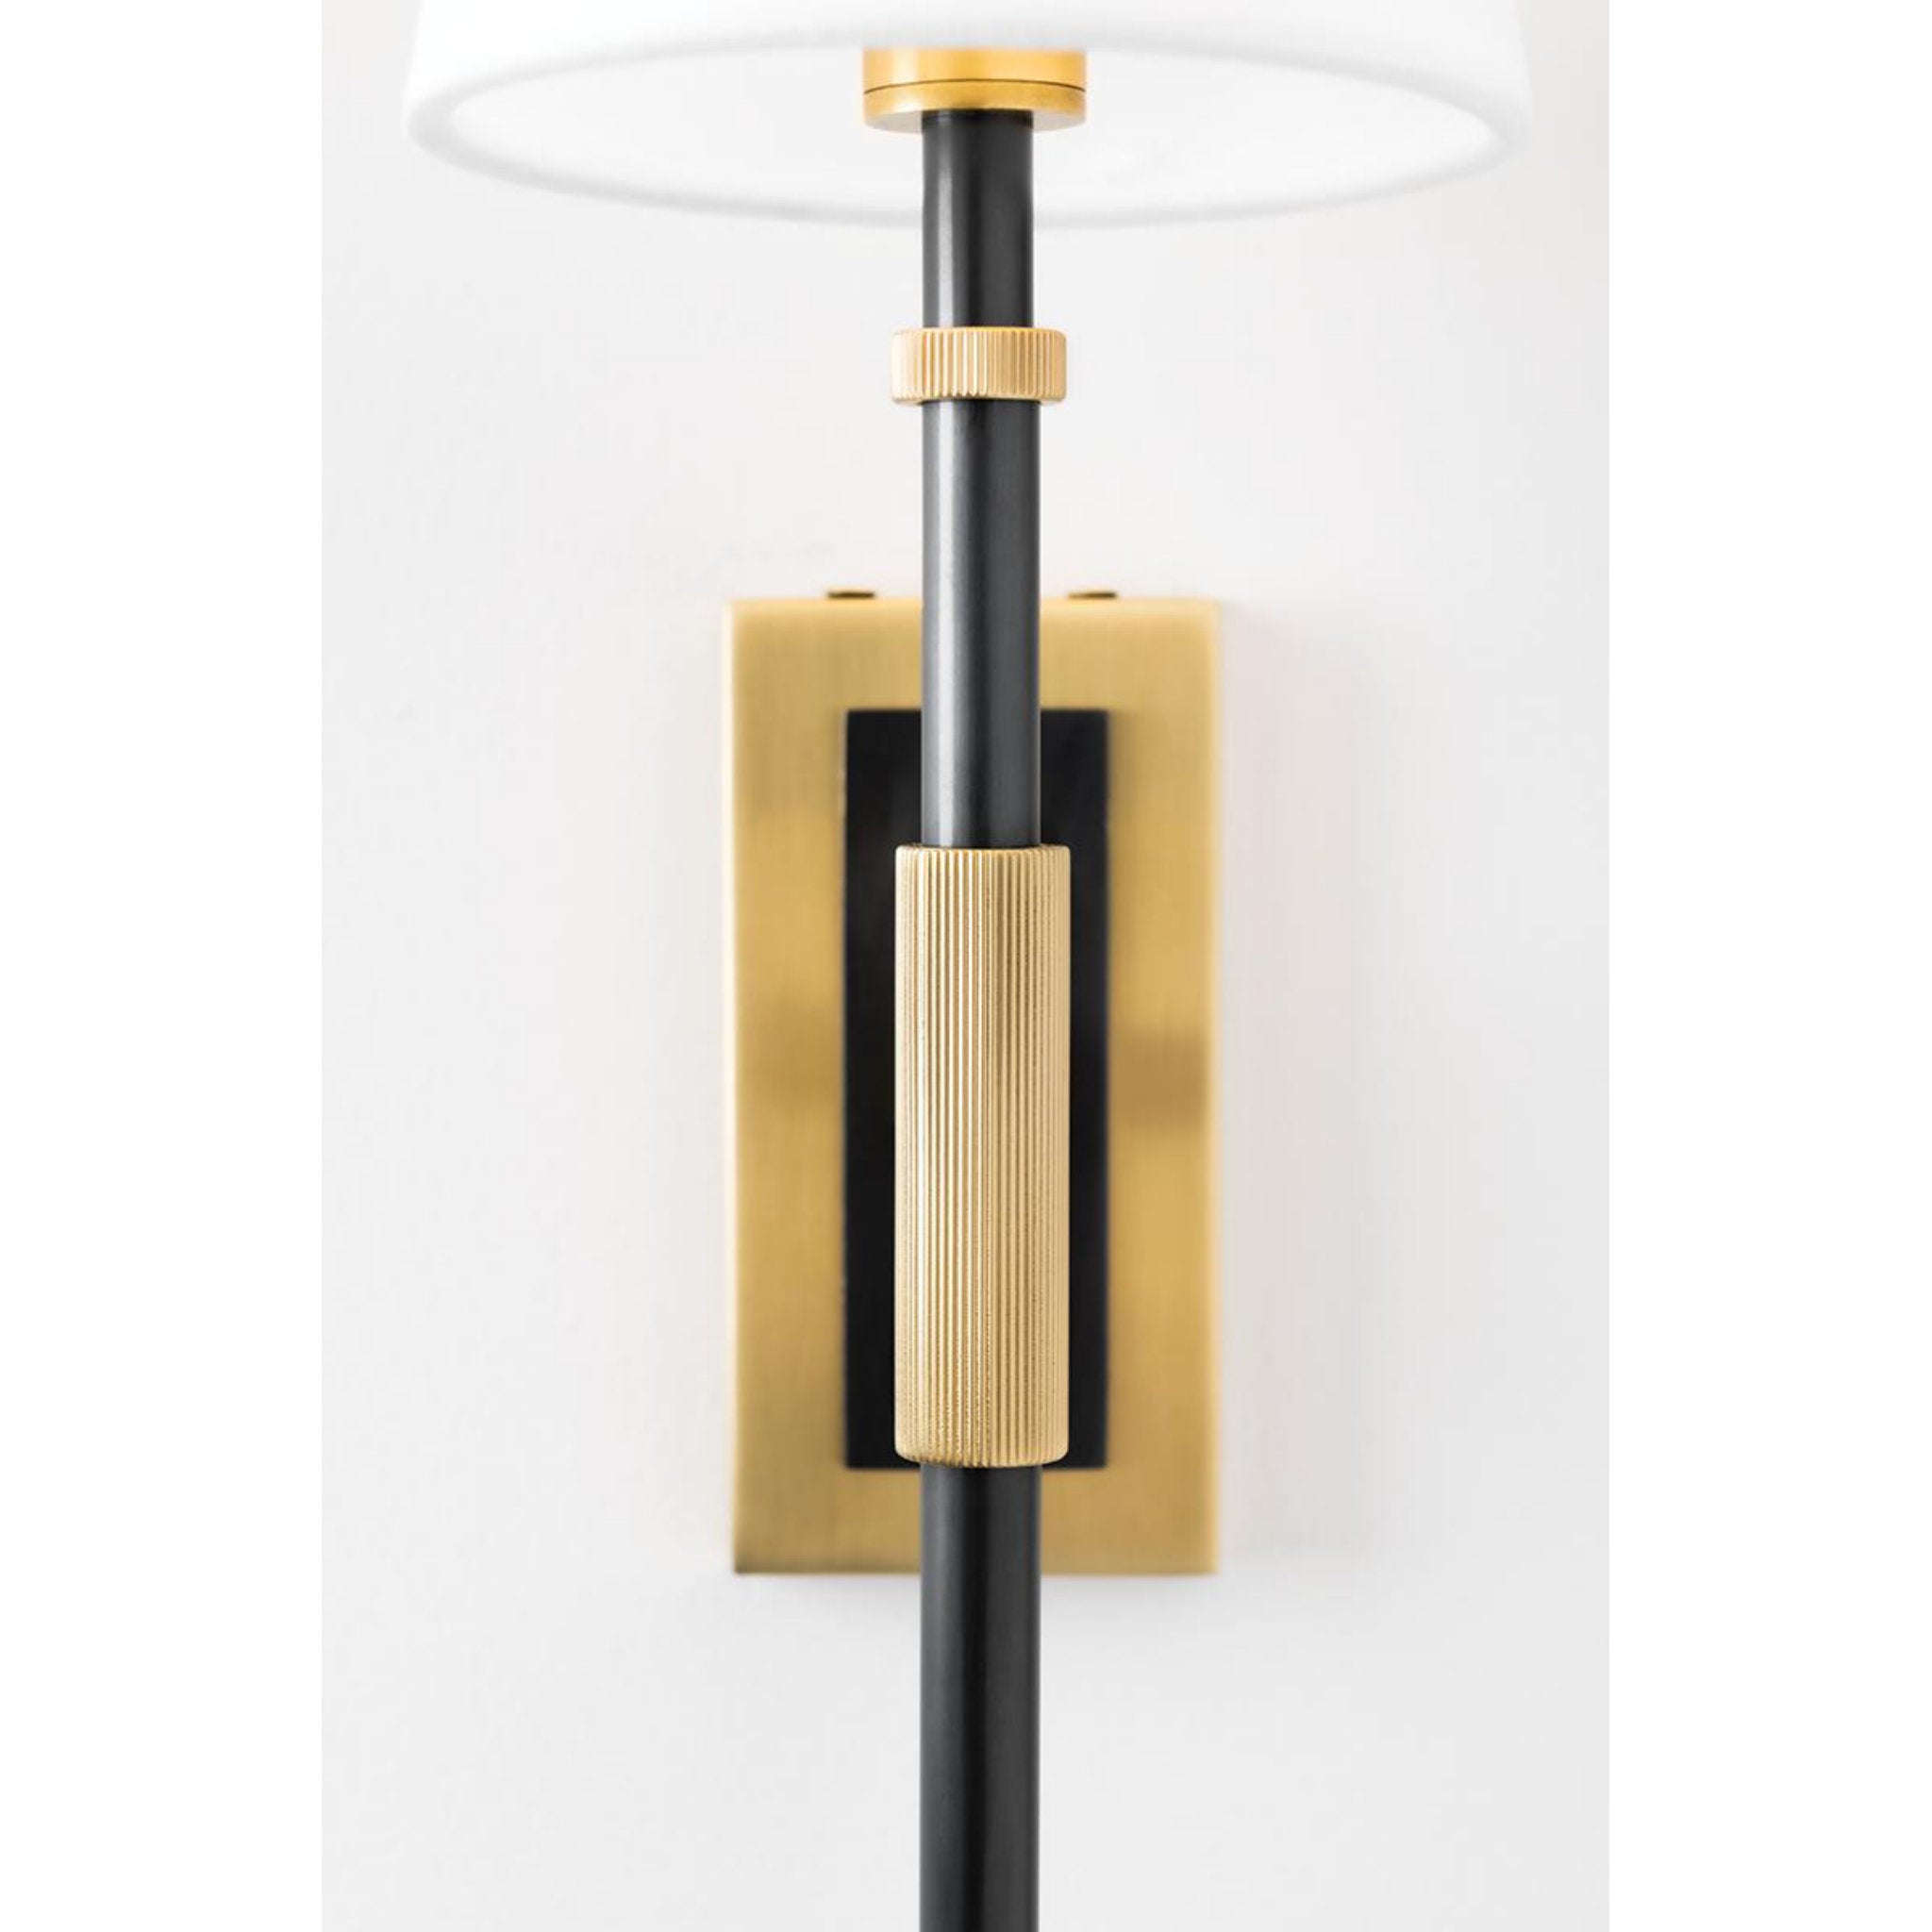 Bowery 2 Light Wall Sconce in Polished Nickel